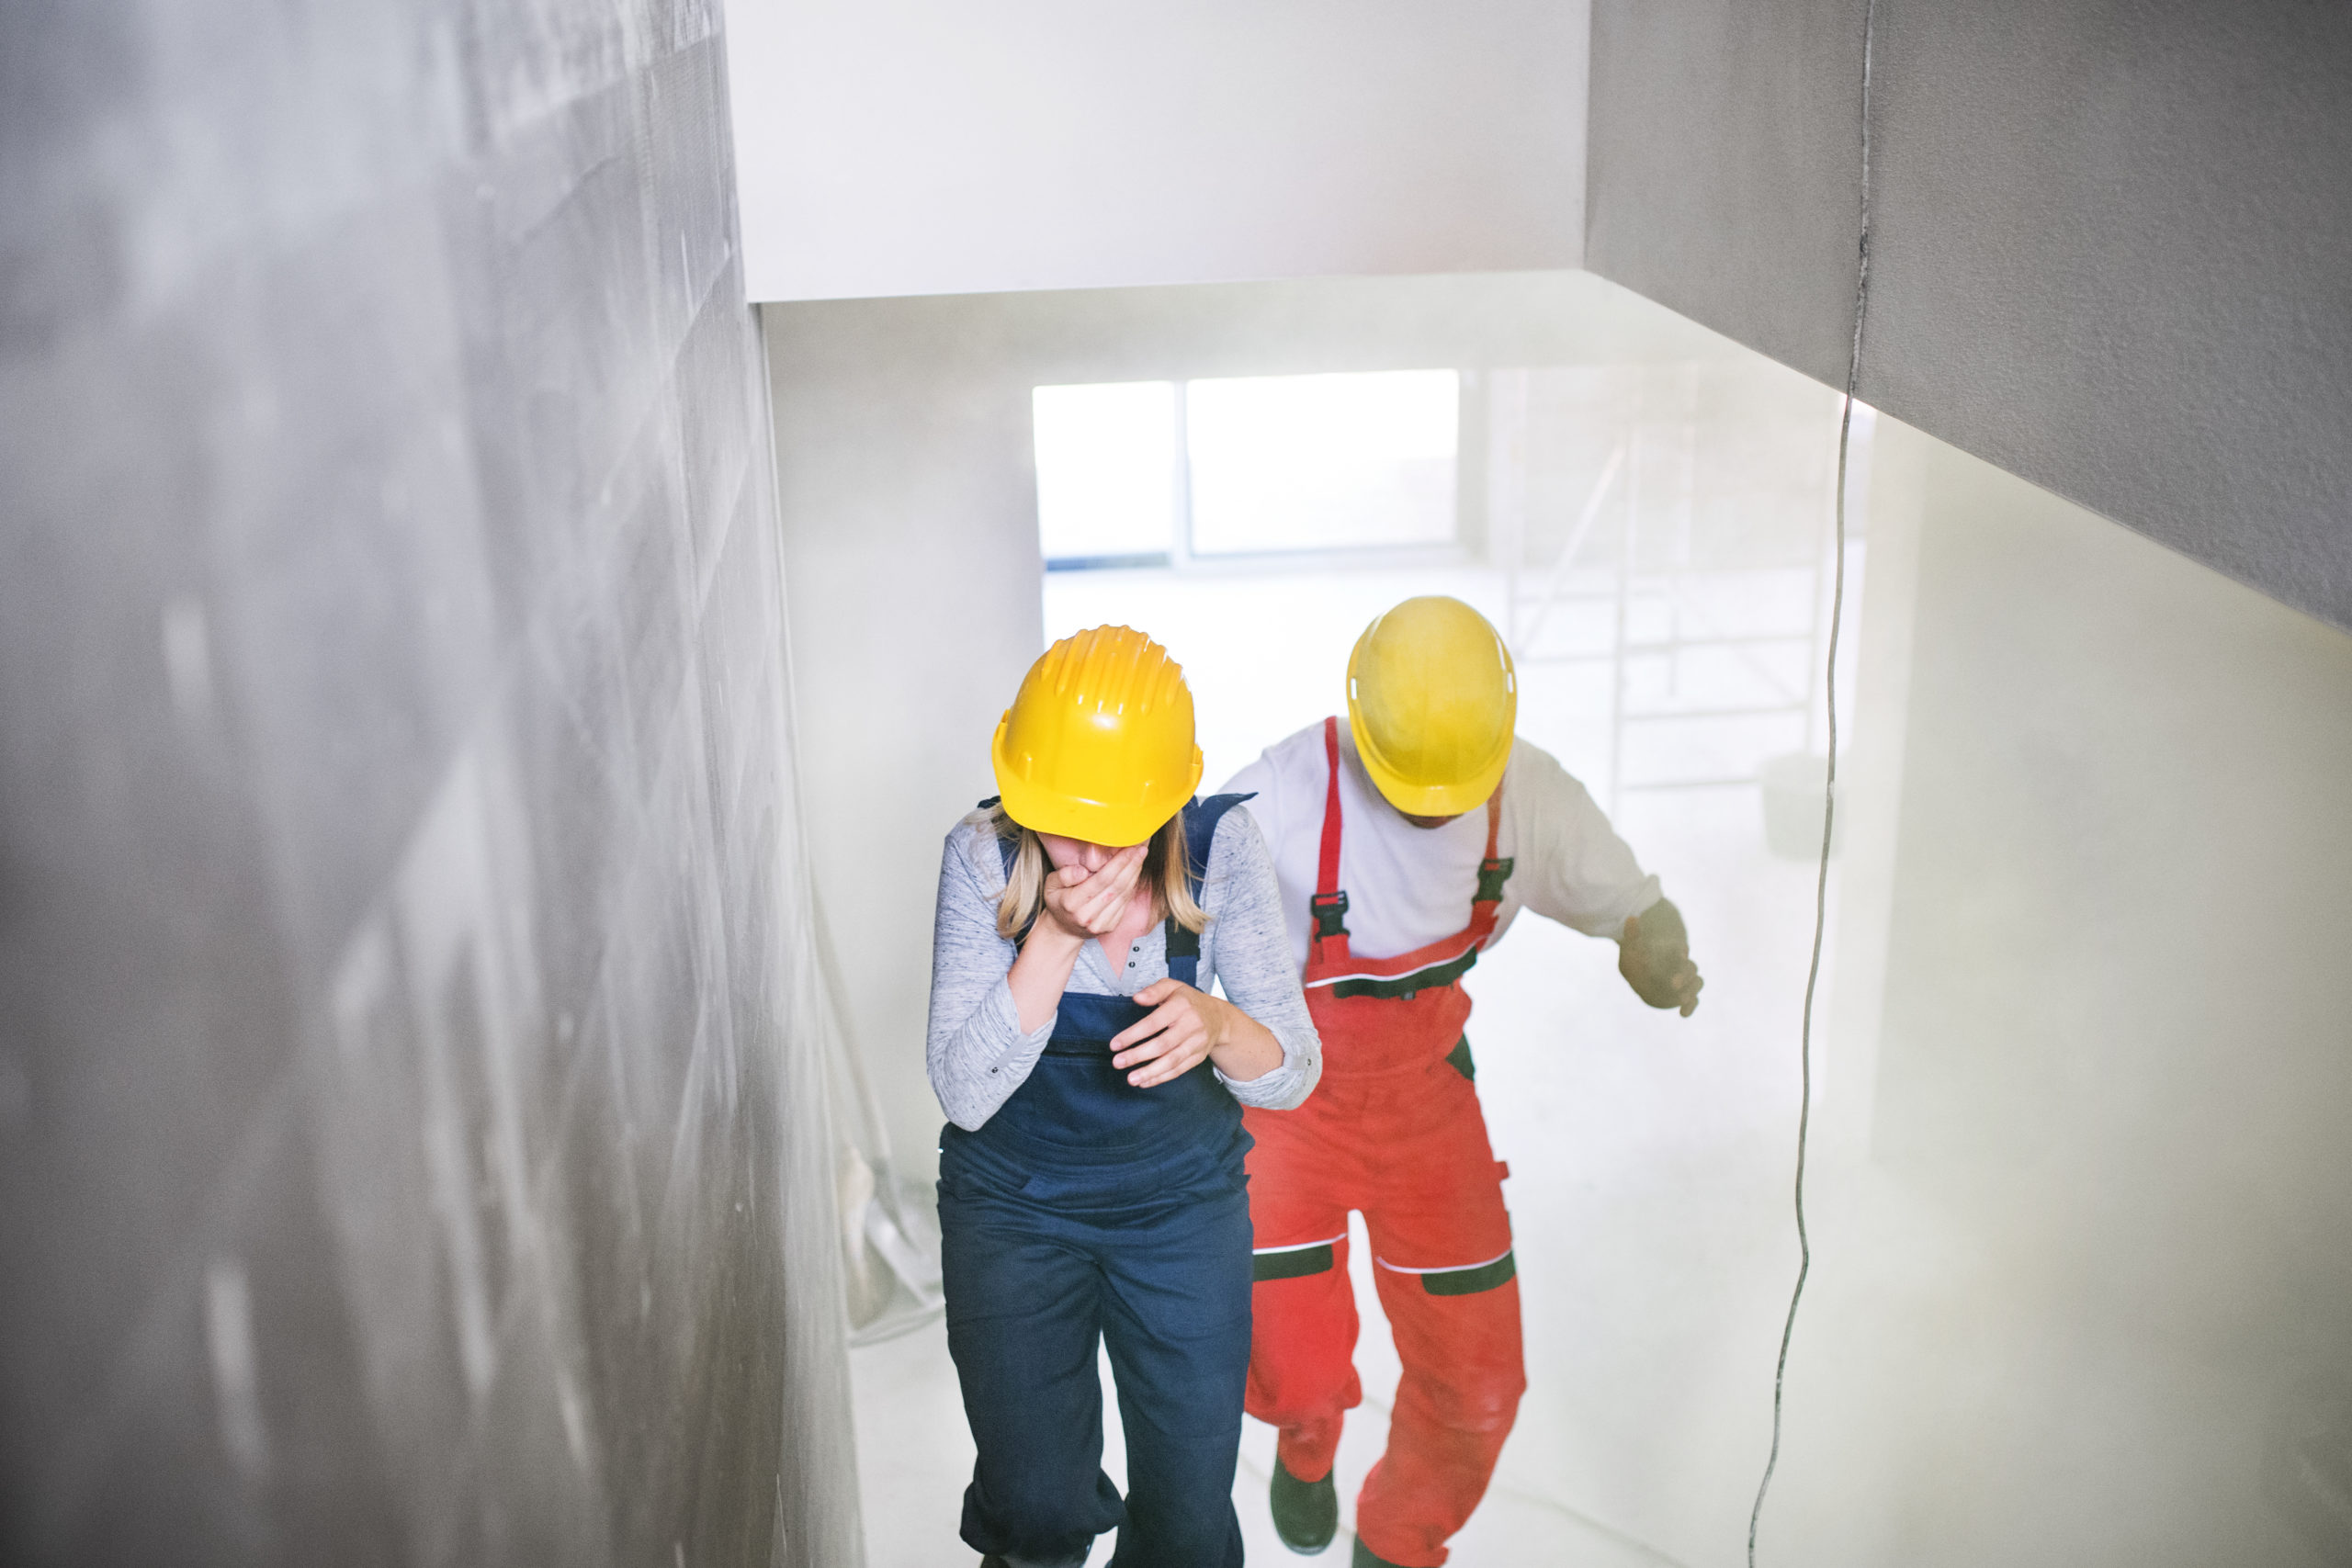 A woman and a man in construction clothes are running upstairs through dust while coughing at a worksite.